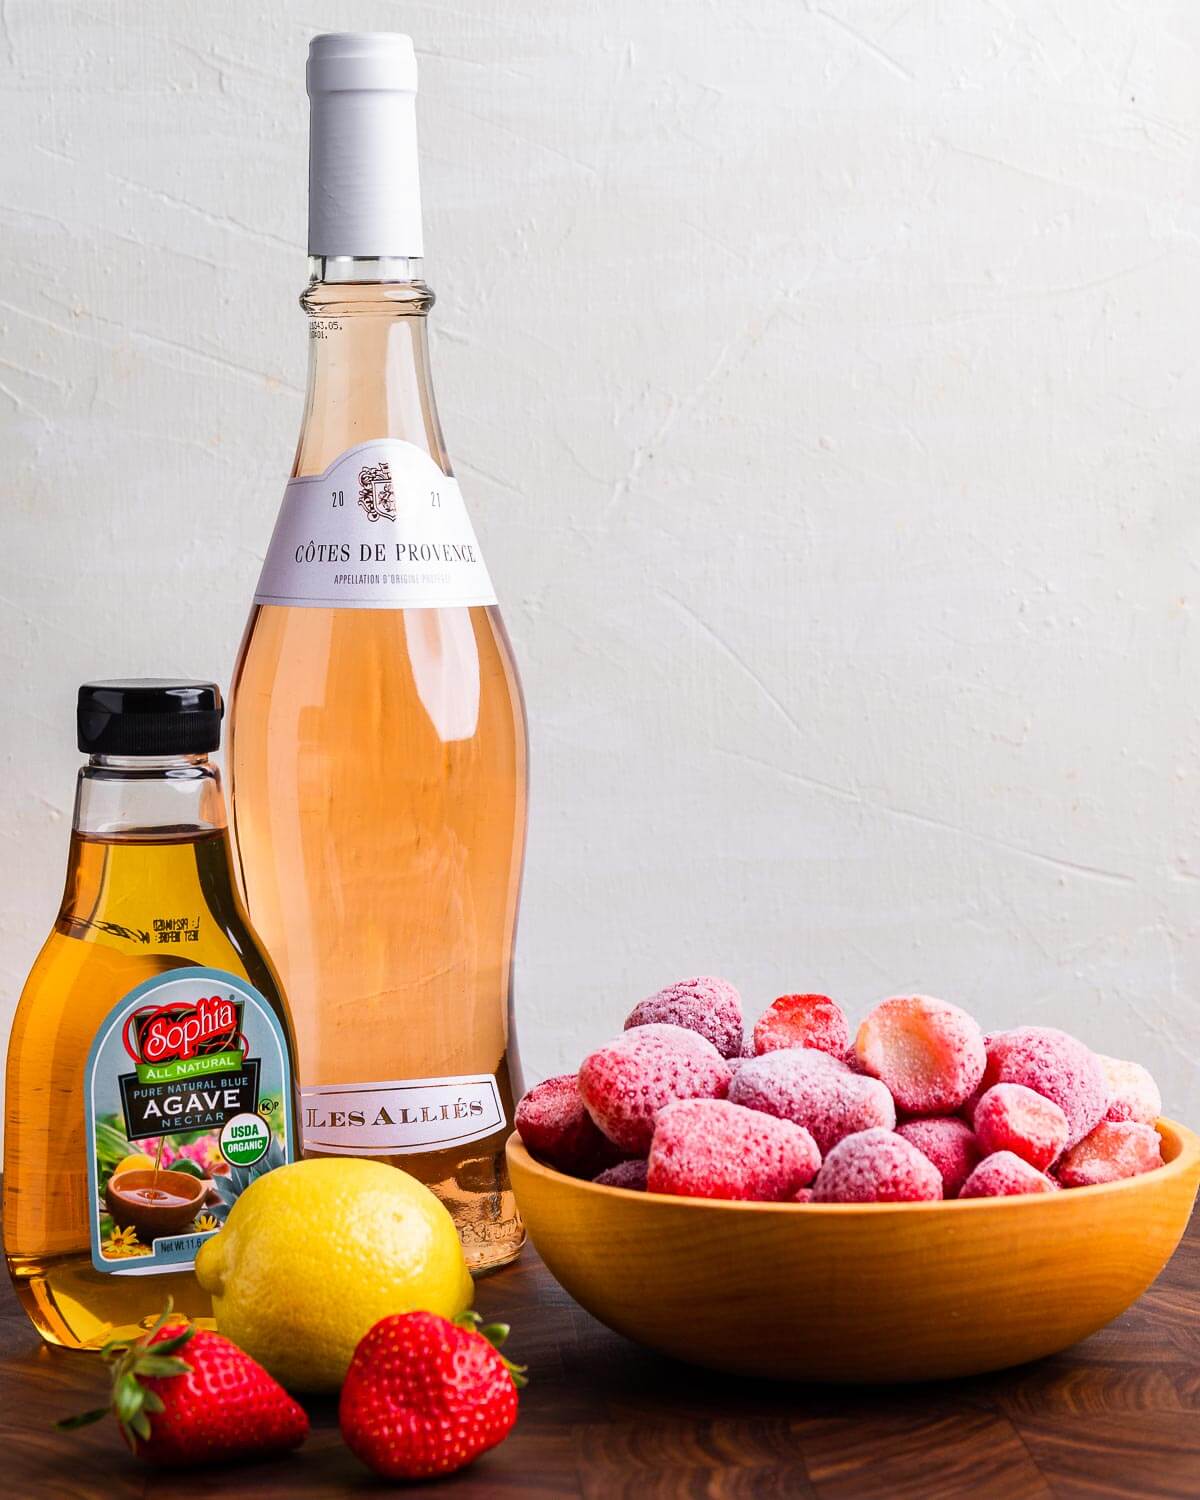 Ingredients shown: rosé wine, agave, frozen and fresh strawberries, and a lemon.